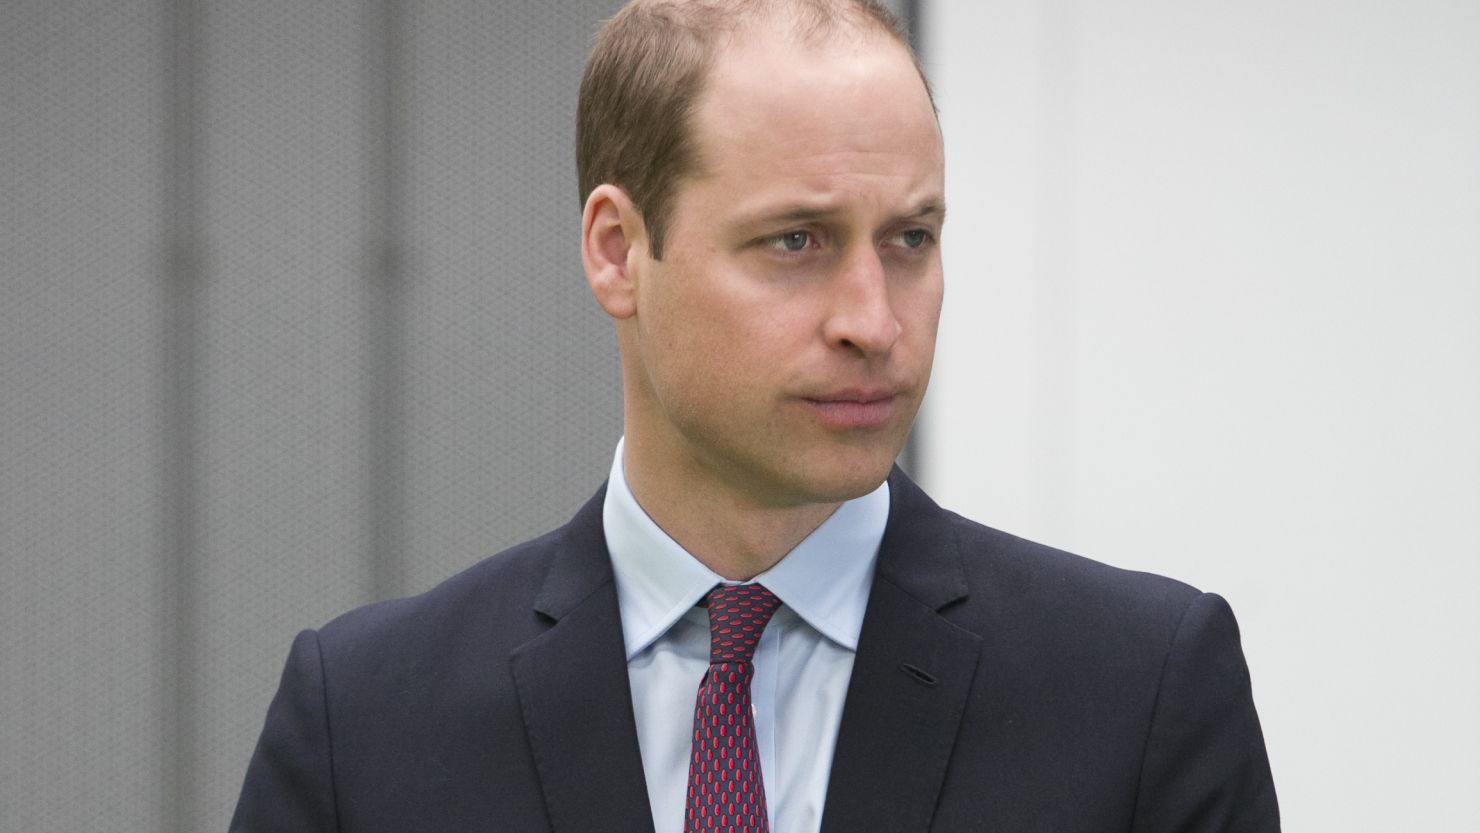 Prince William highlights a crackdown on global wildlife trafficking routes.